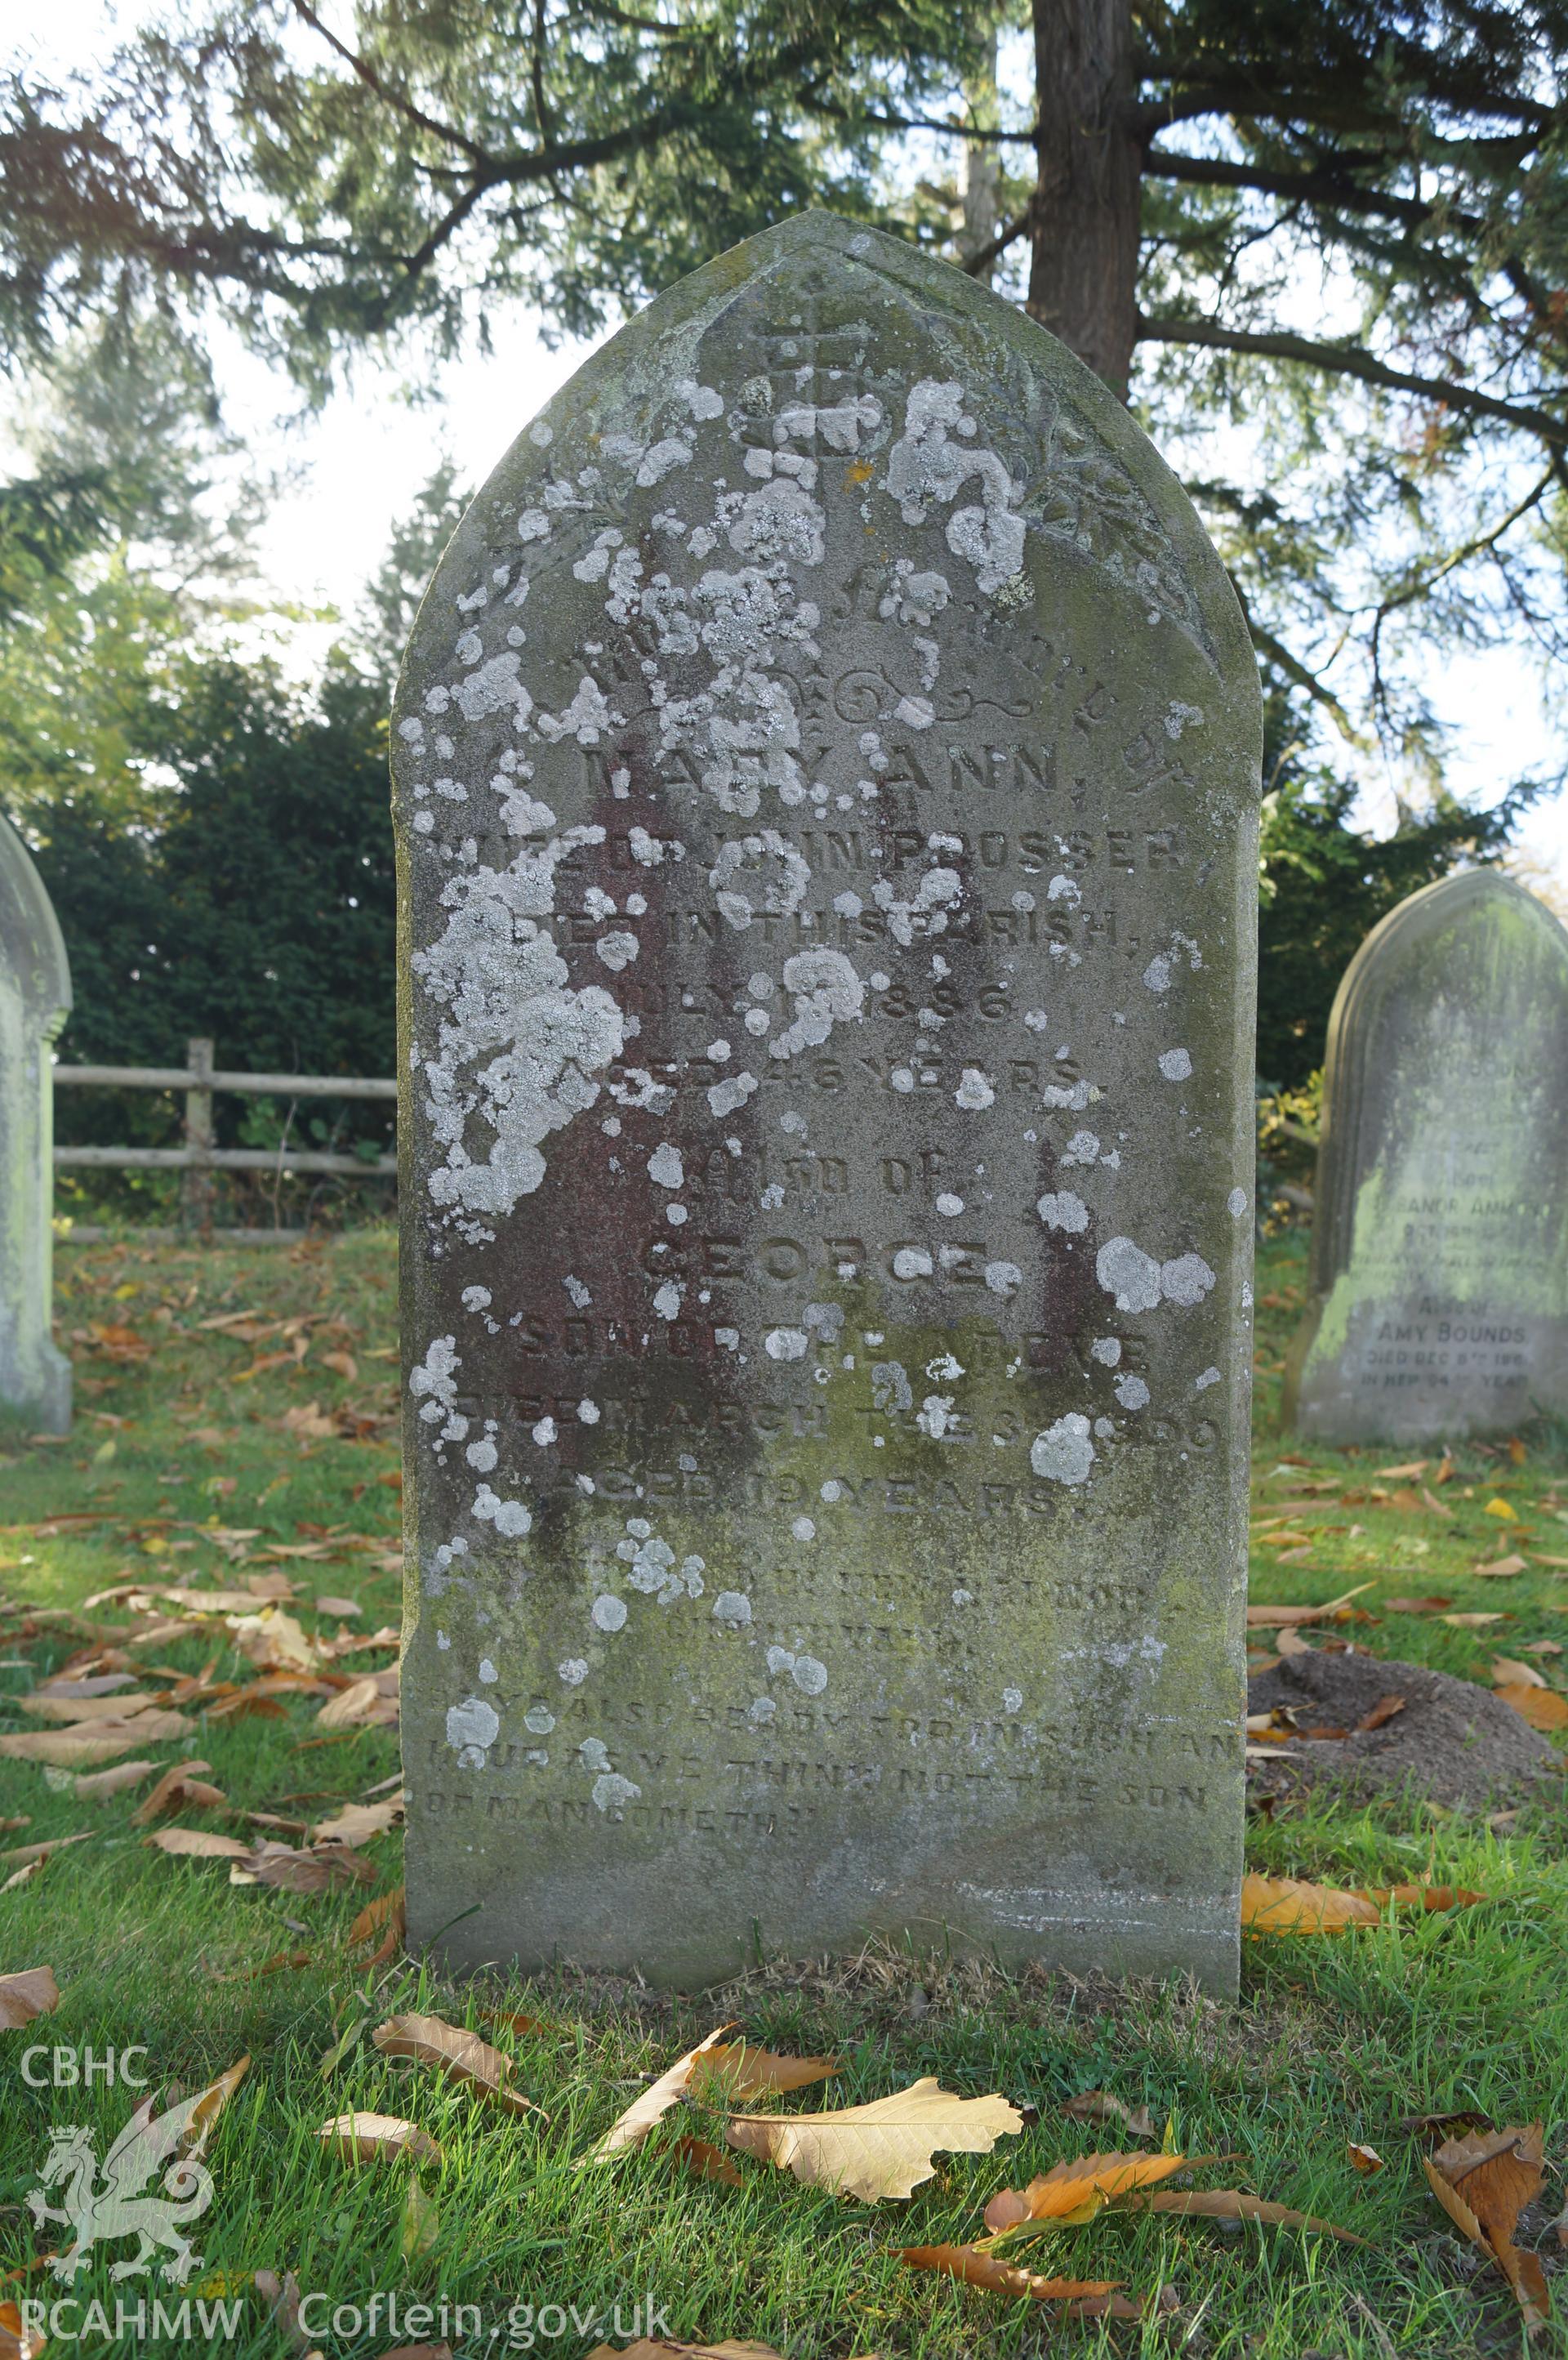 View 'looking west at a gravestone' at St. Mary's, Gladestry, Powys. Photograph & description by Jenny Hall and Paul Sambrook of Trysor, 16th October 2017.